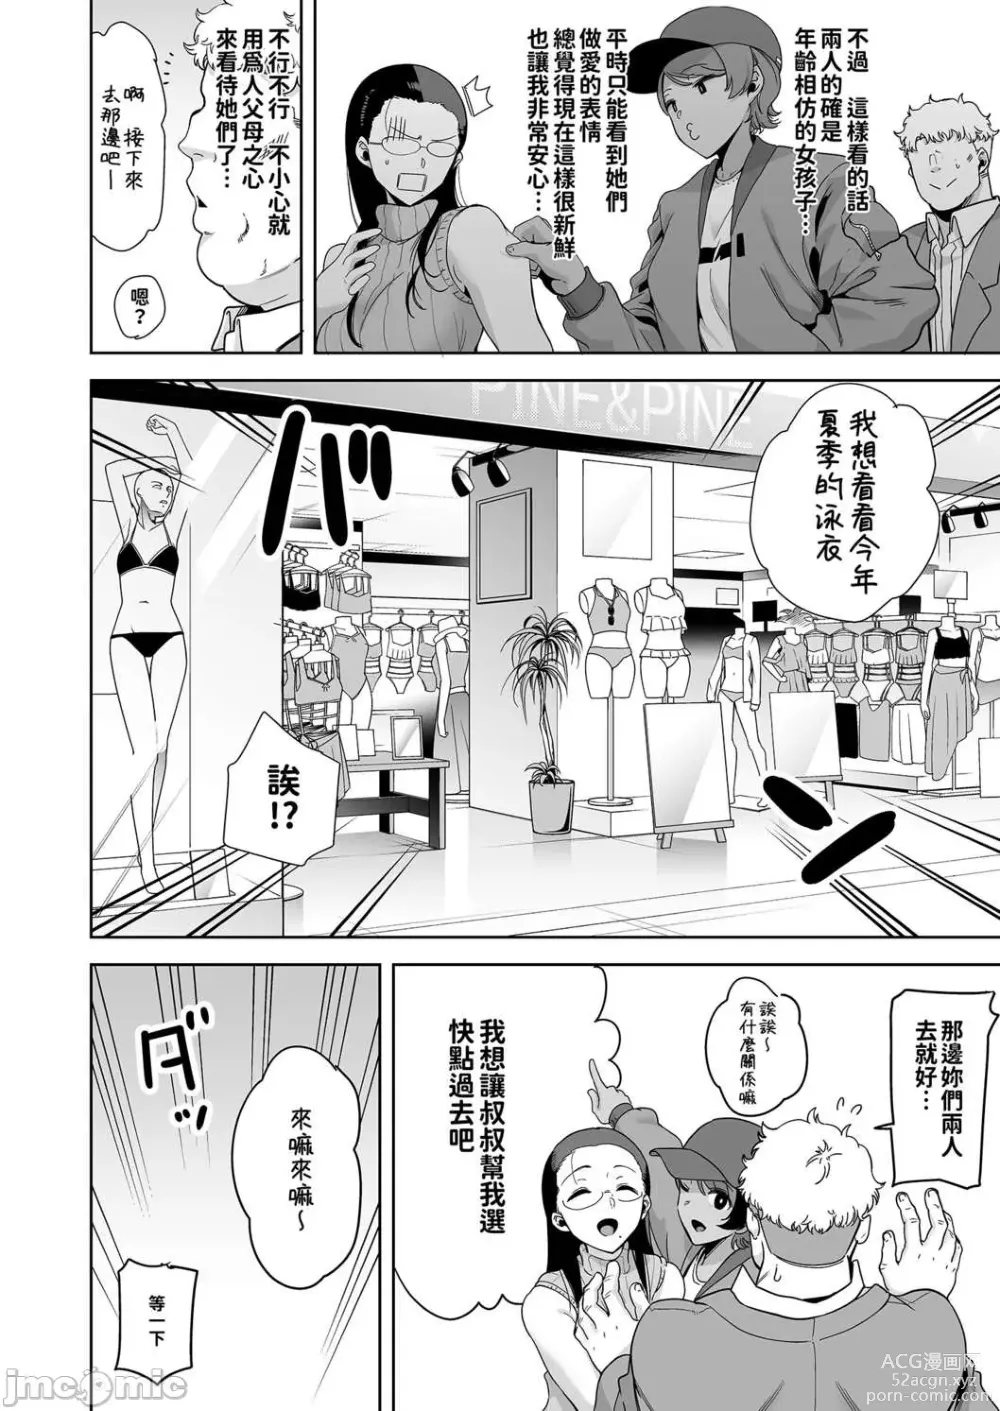 Page 8 of doujinshi 聖華女学院高等部公認竿おじさん 3